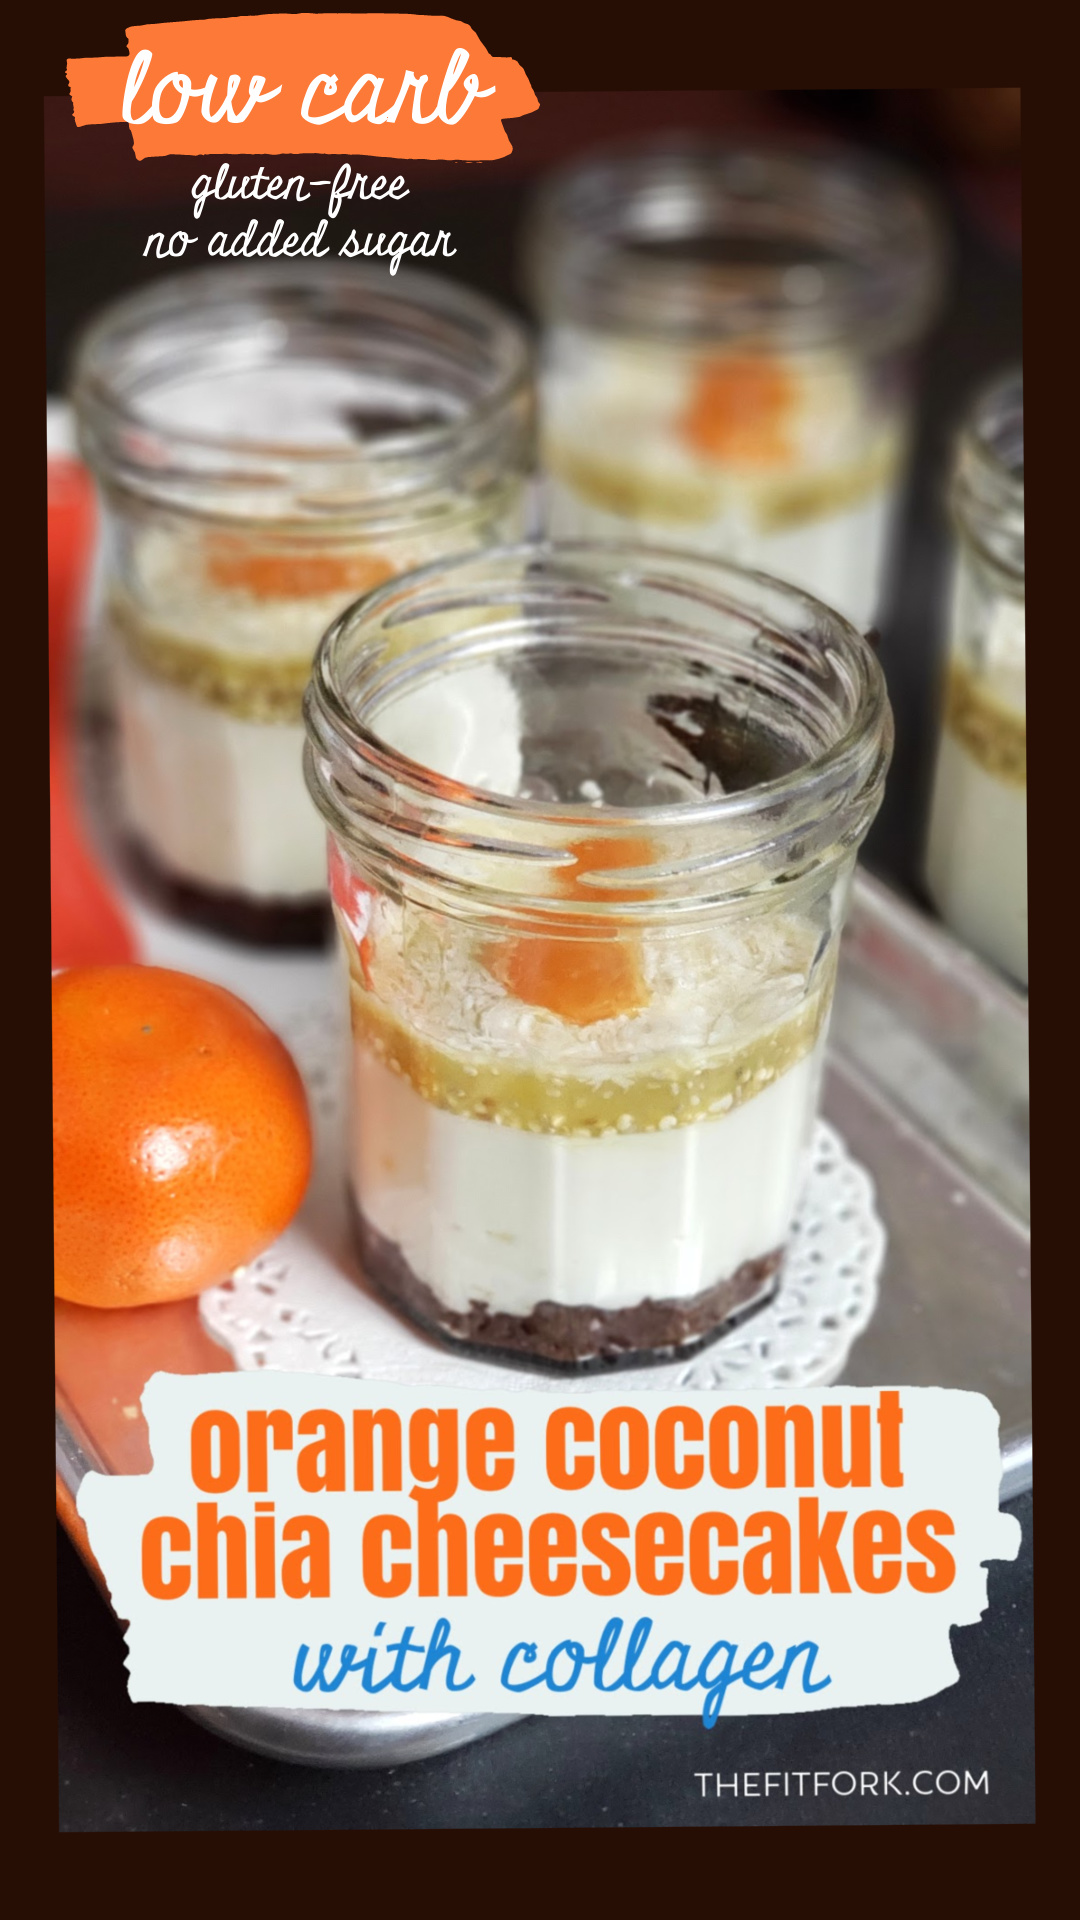 Cottage Cheese Snack Jar